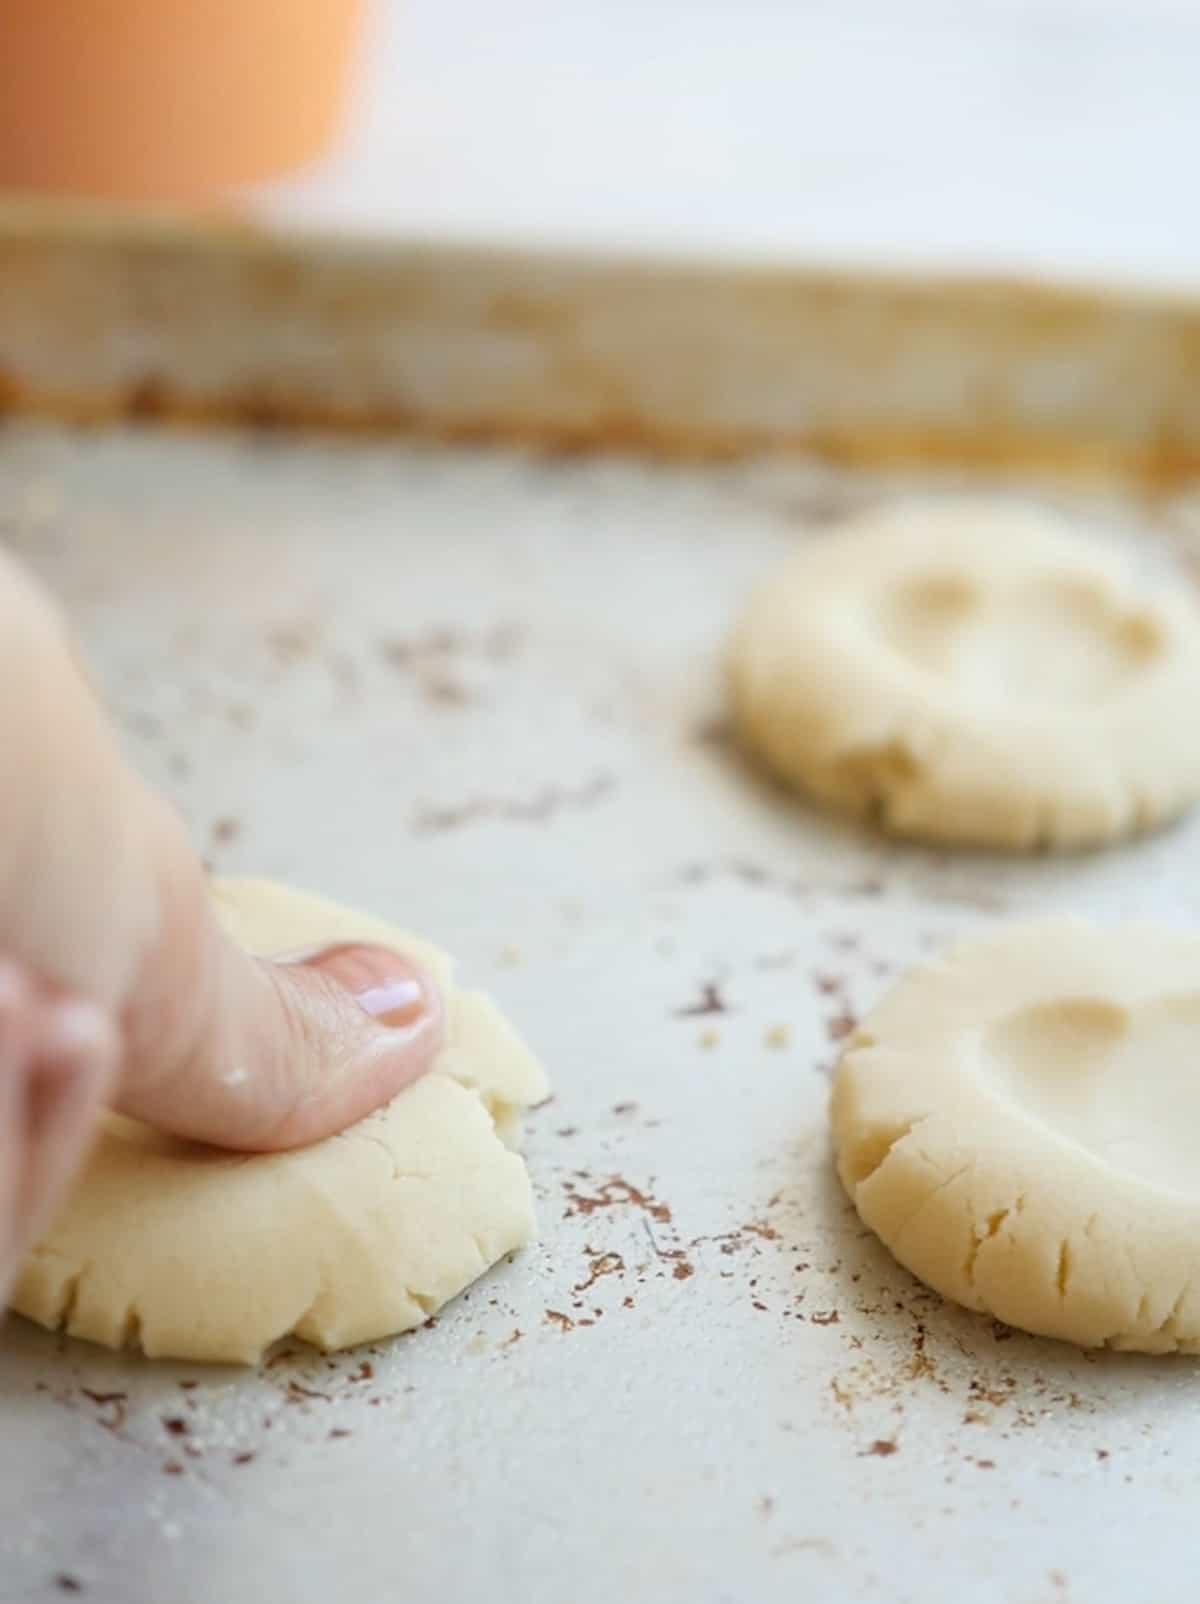 Thumb pressing into flattened cookies on a baking tray to form a heart shape.